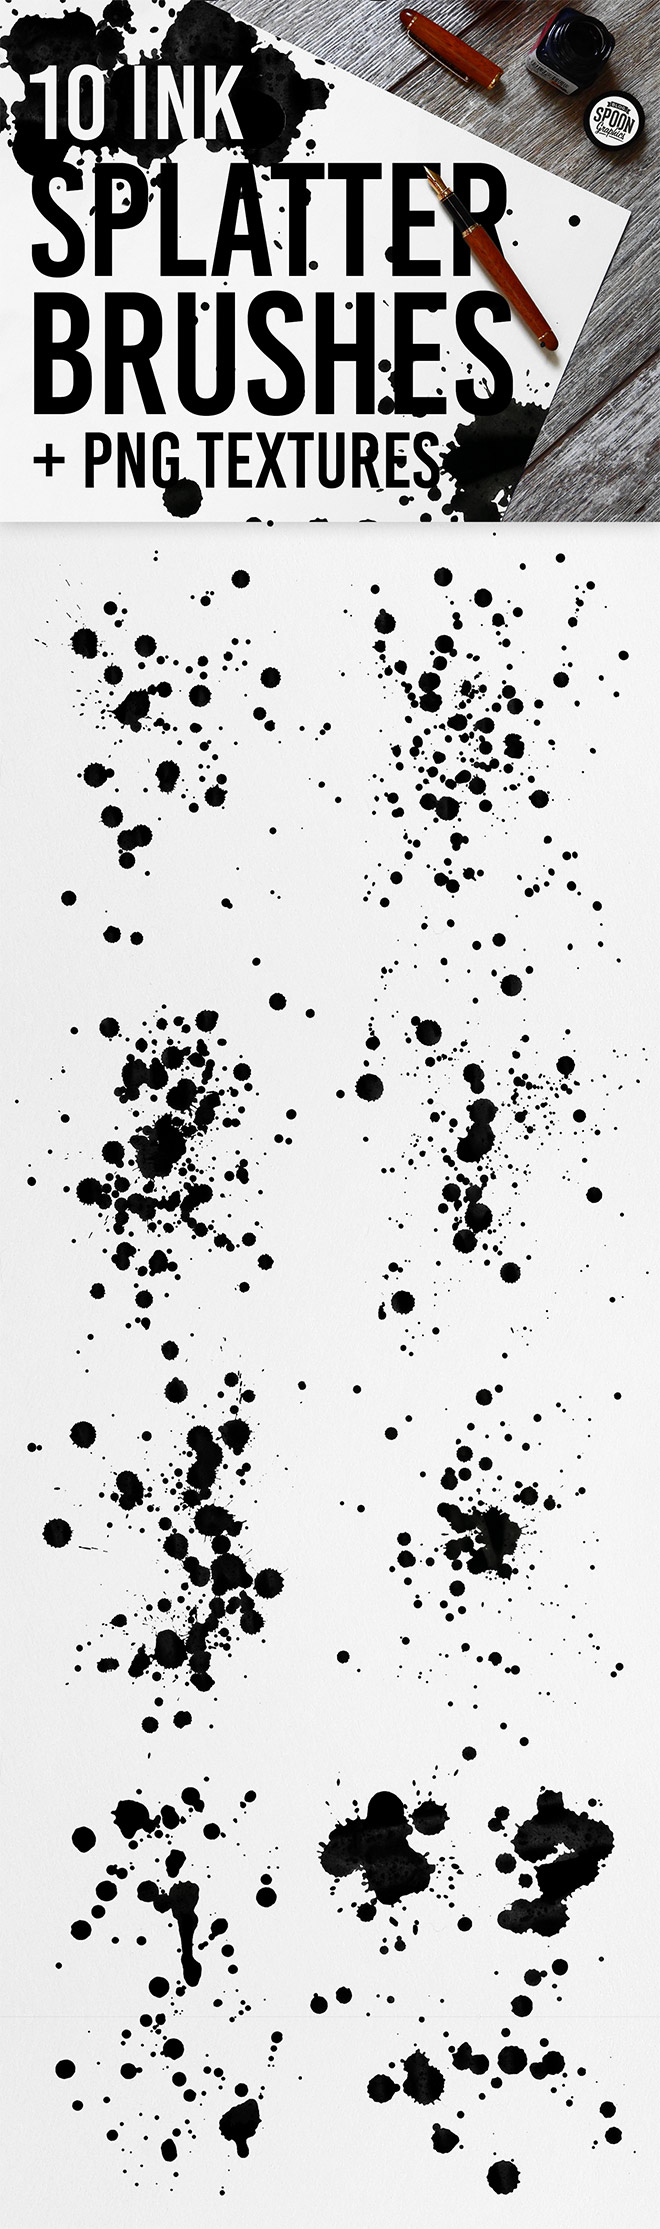 10 Ink Splatter Photoshop Brushes and PNG Textures